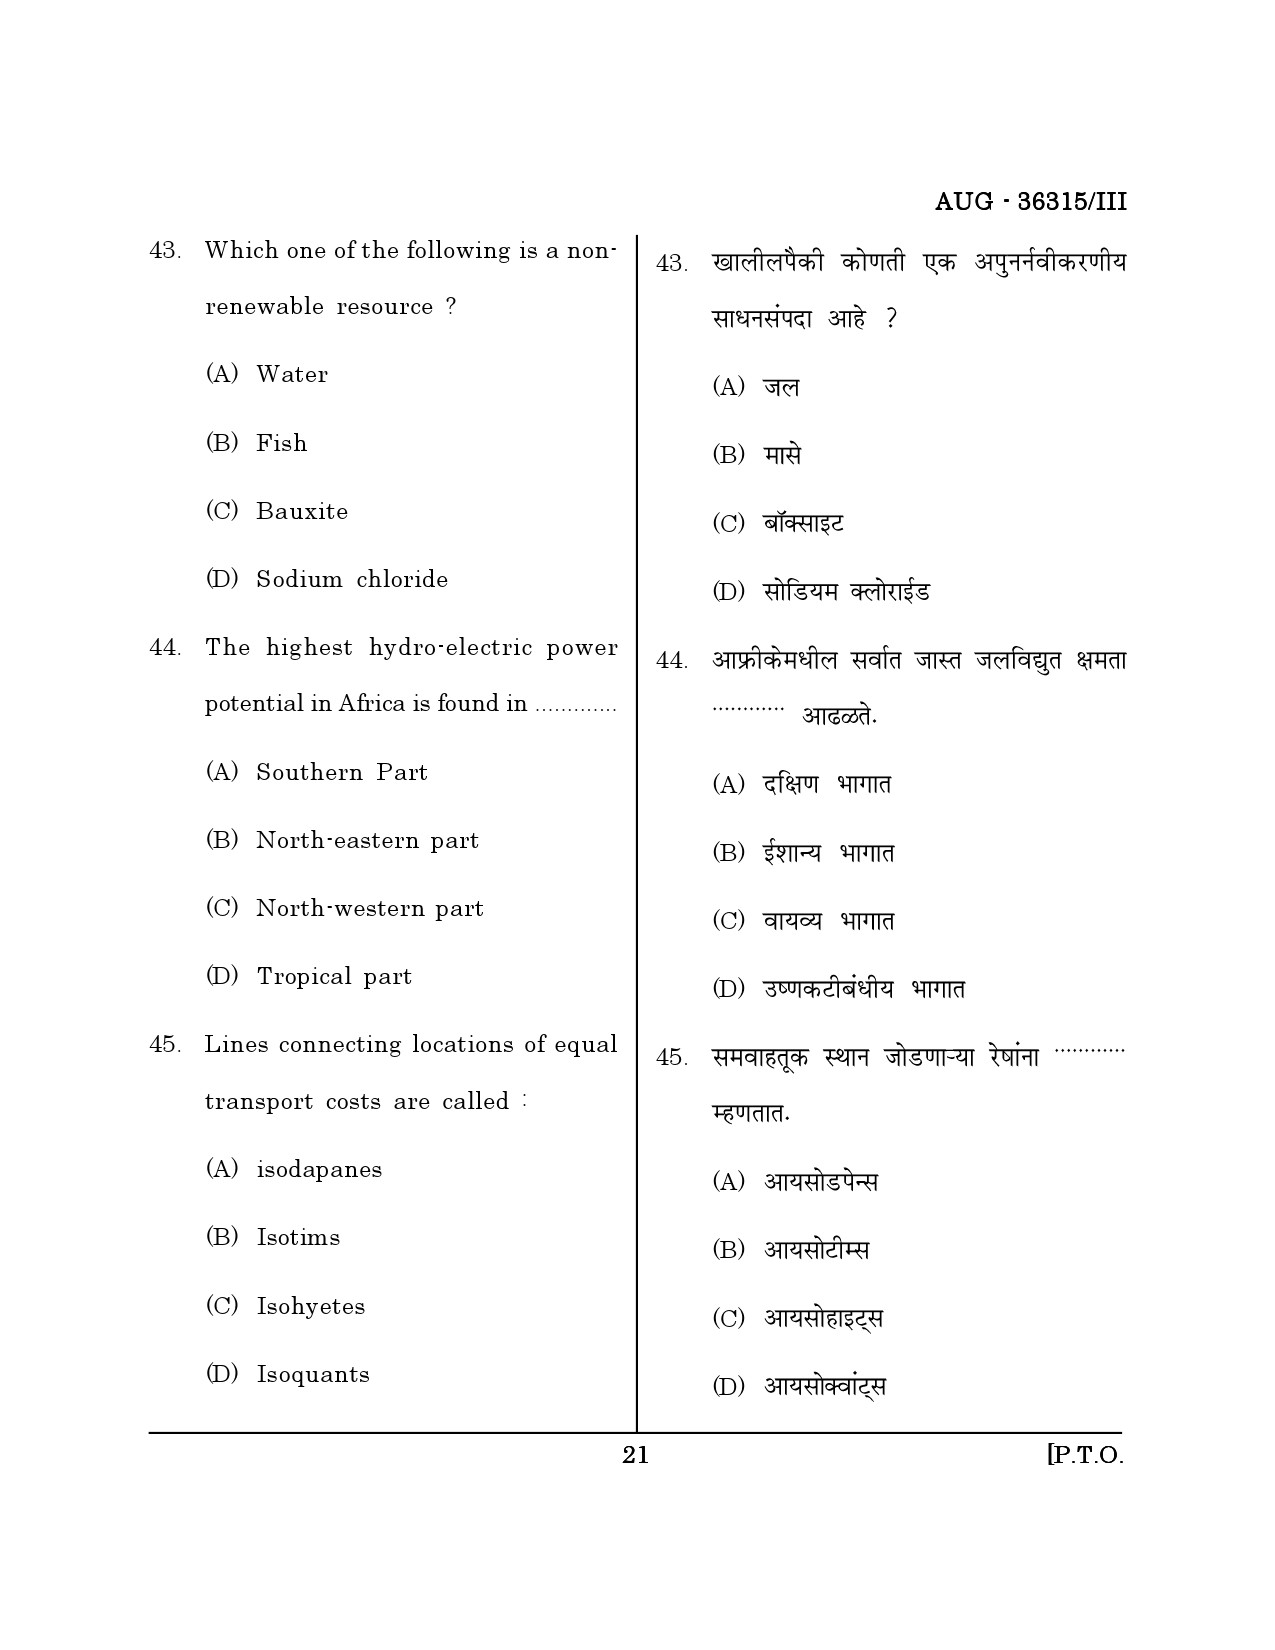 Maharashtra SET Geography Question Paper III August 2015 20